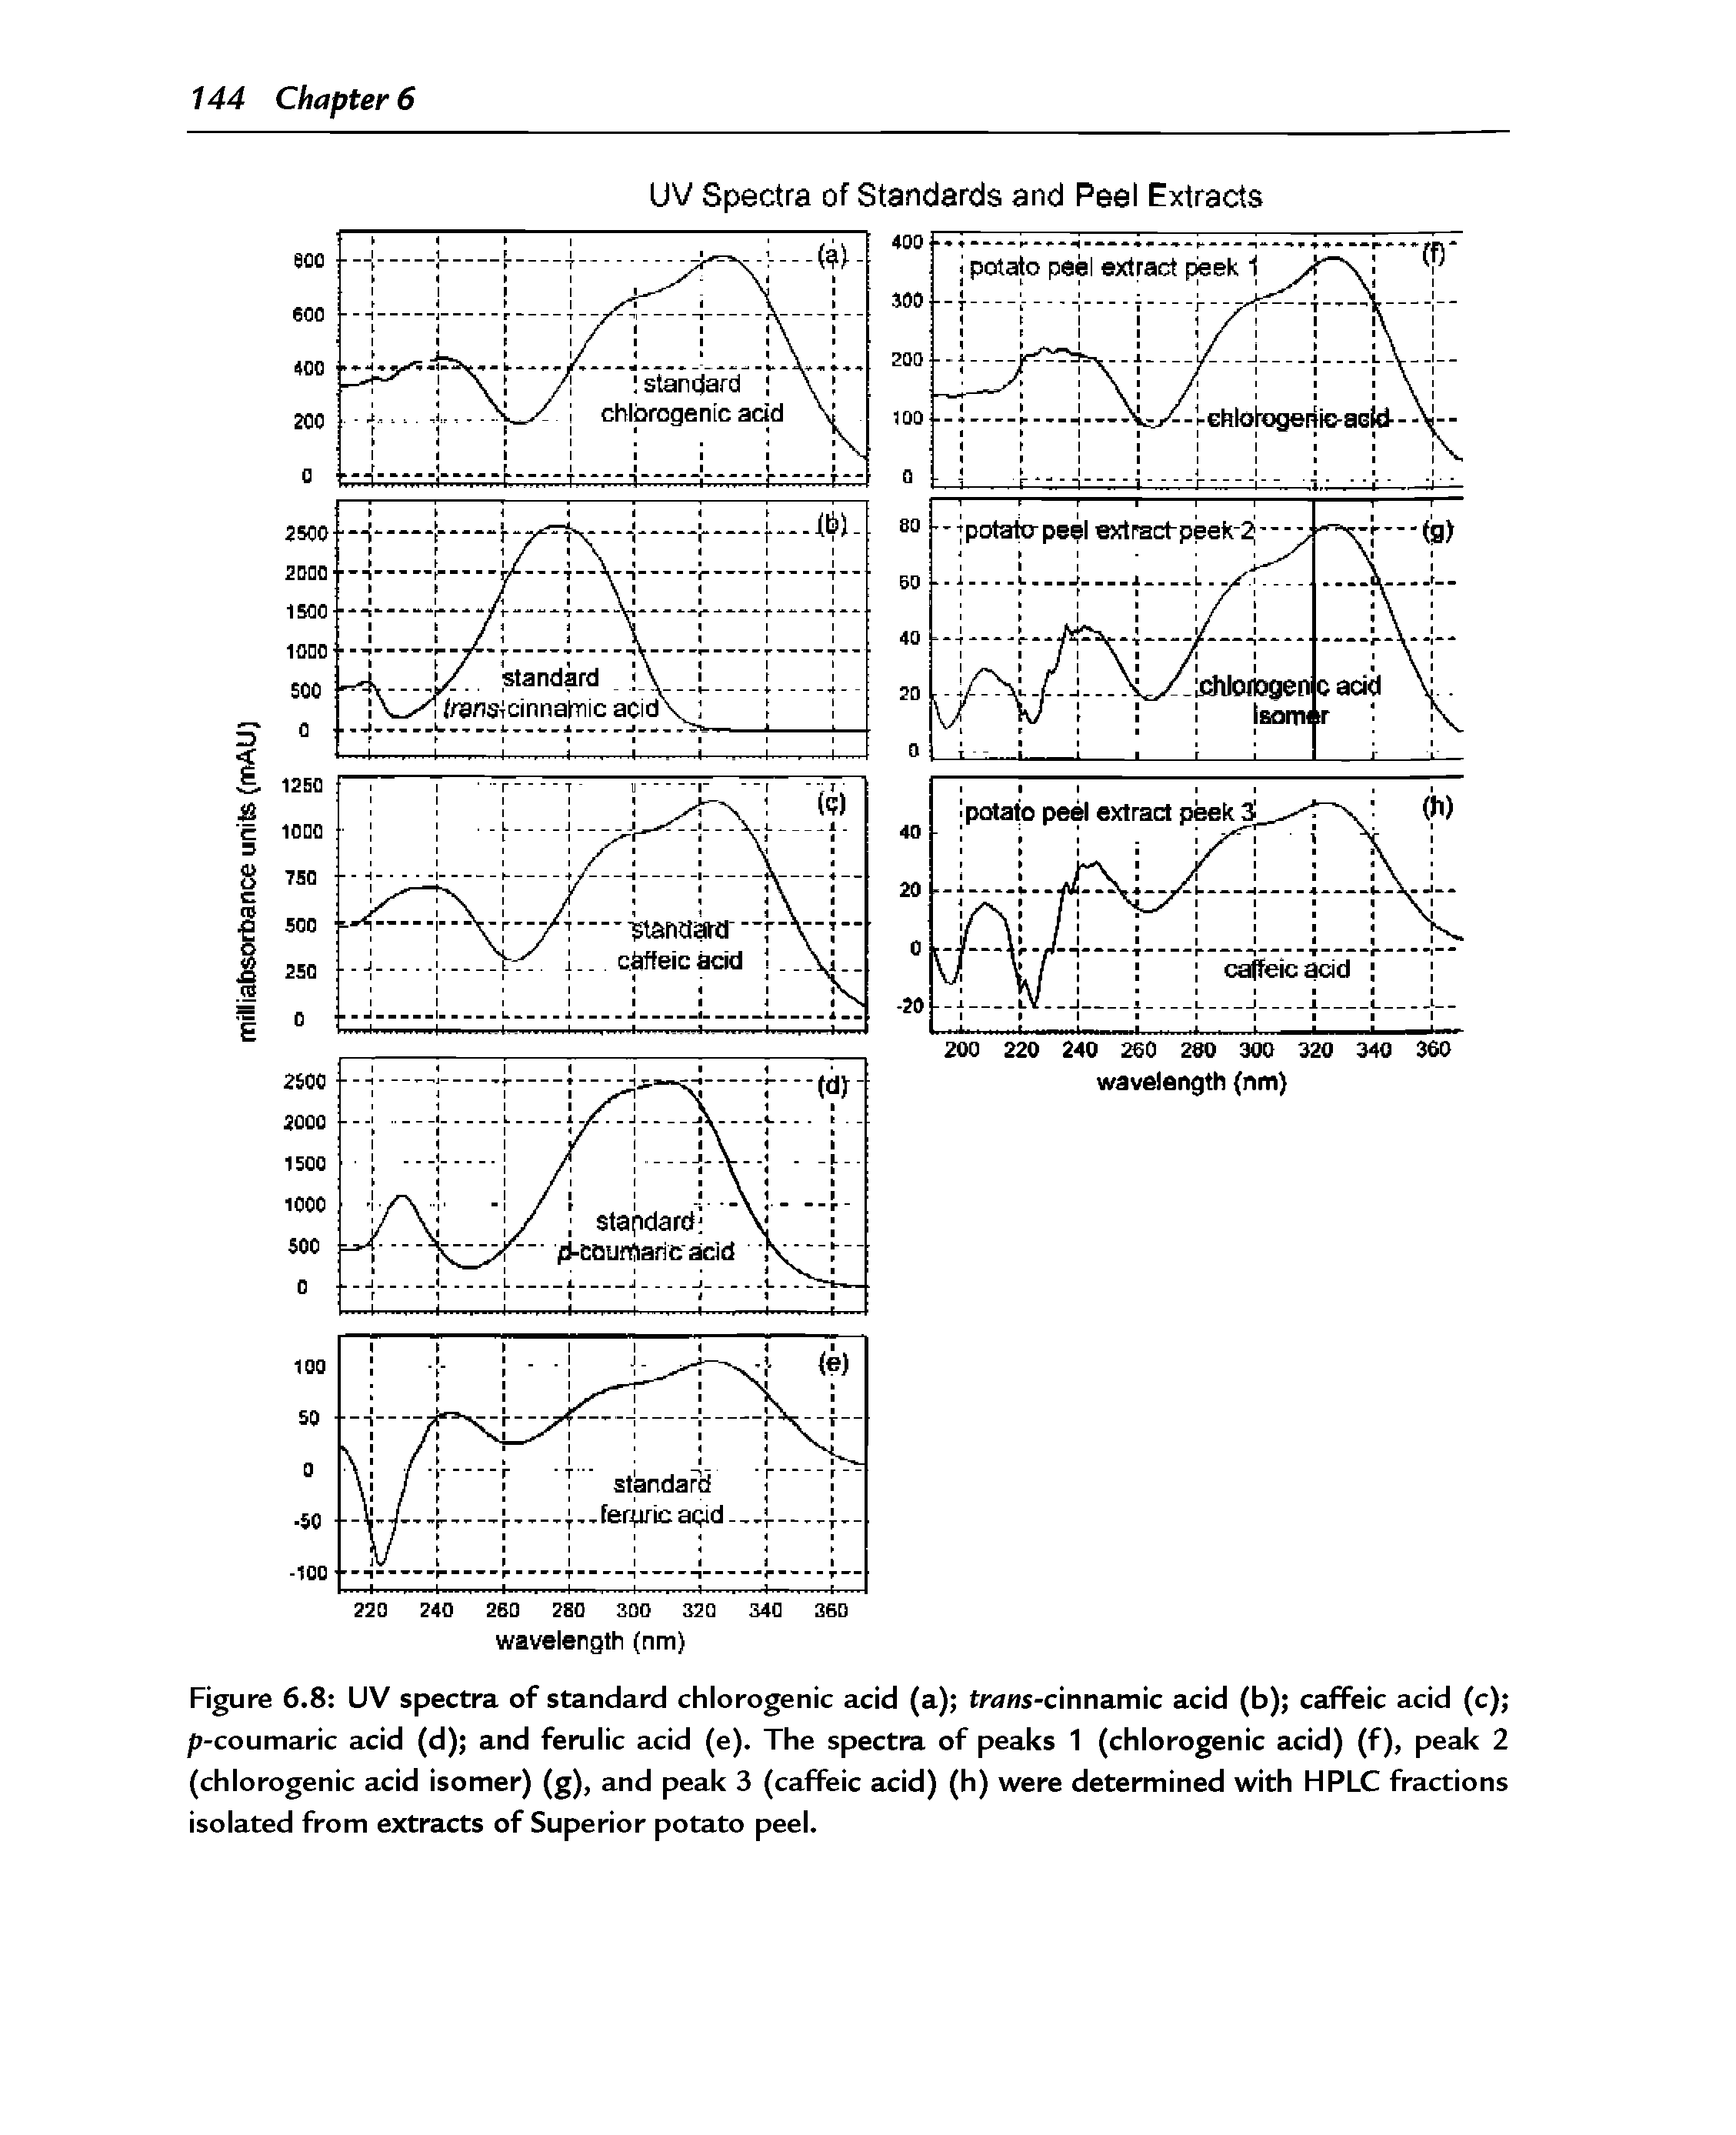 Figure 6.8 UV spectra of standard chlorogenic acid (a) trans-cinnamic acid (b) cafFeic acid (c) p-coumaric acid (d) and femlic acid (e). The spectra of peaks 1 (chlorogenic acid) (f), peak 2 (chlorogenic acid isomer) (g), and peak 3 (caffeic acid) (h) were determined with HPLC fractions isolated from extracts of Superior potato peel.